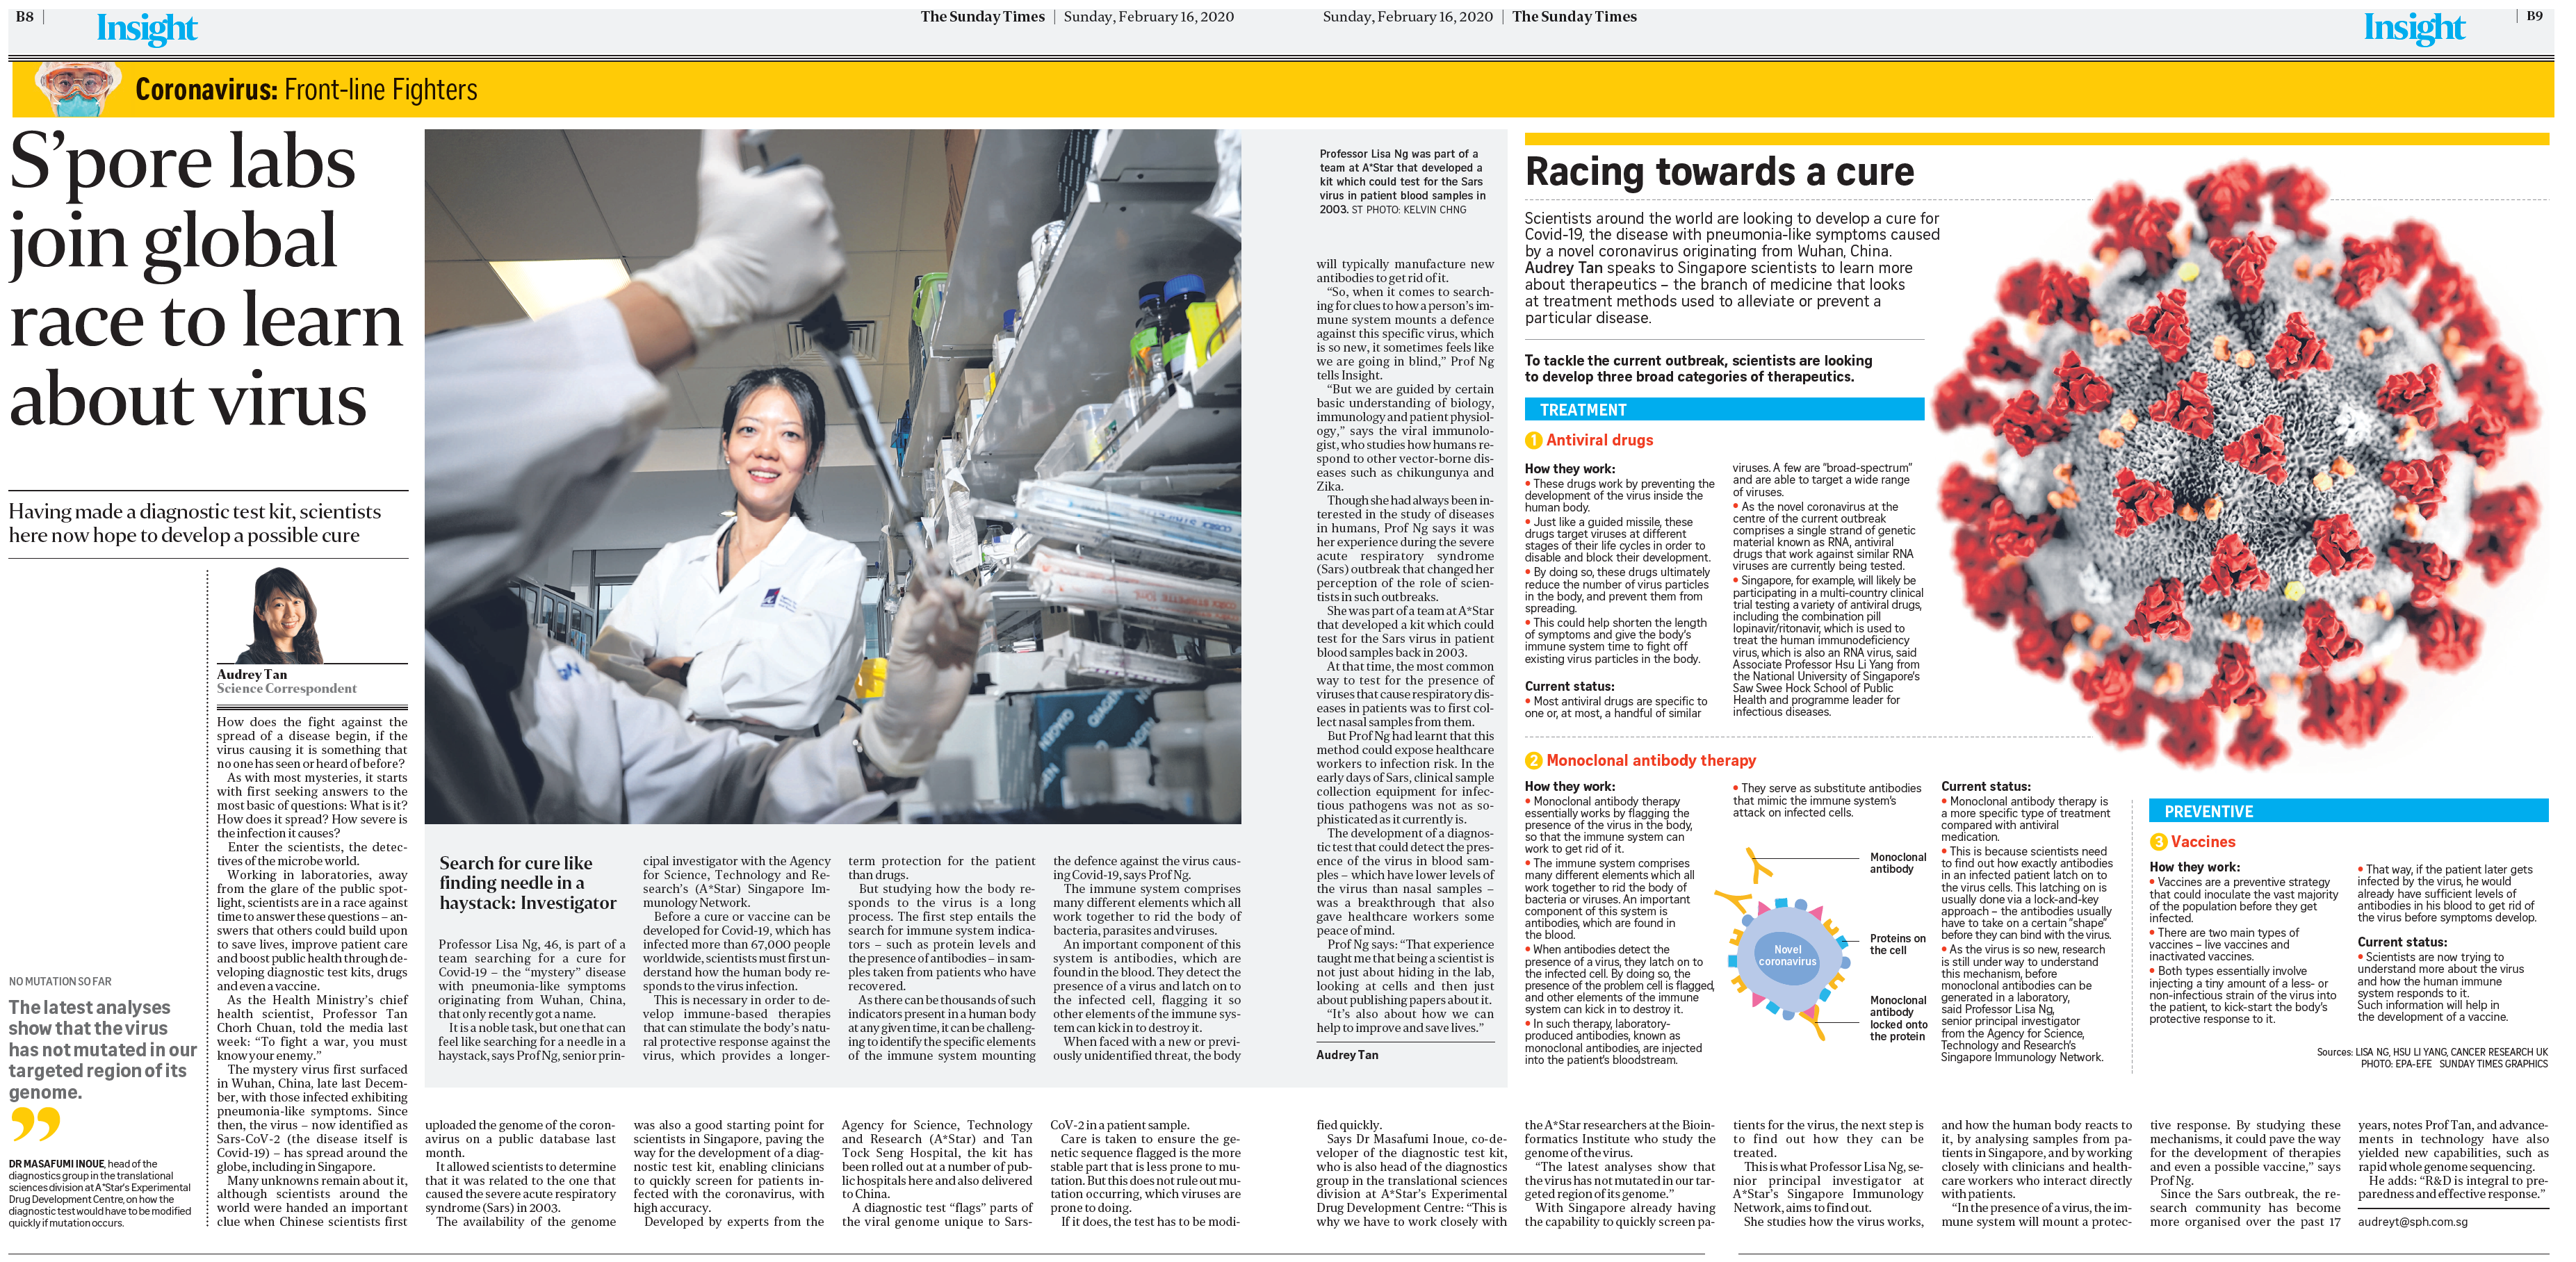 S'pore labs join global race to learn about virus (The Sunday Times, 16 Feb 2020, pB8-9)